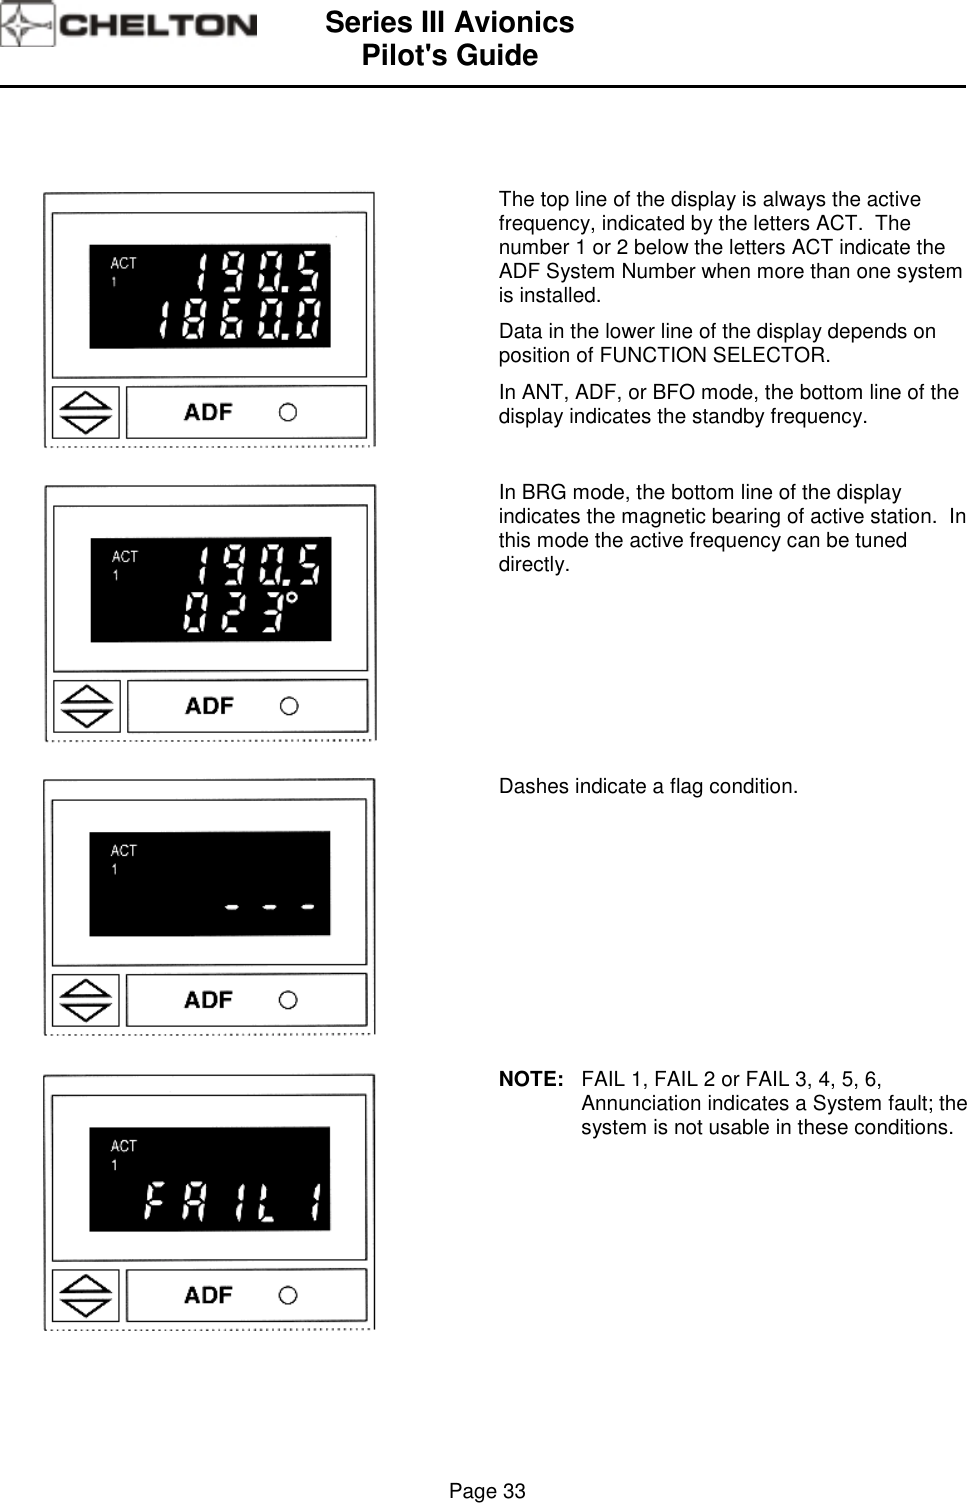 Series III AvionicsPilot&apos;s Guide                                                                                                                                          Page 33The top line of the display is always the activefrequency, indicated by the letters ACT.  Thenumber 1 or 2 below the letters ACT indicate theADF System Number when more than one systemis installed.Data in the lower line of the display depends onposition of FUNCTION SELECTOR.In ANT, ADF, or BFO mode, the bottom line of thedisplay indicates the standby frequency.In BRG mode, the bottom line of the displayindicates the magnetic bearing of active station.  Inthis mode the active frequency can be tuneddirectly.Dashes indicate a flag condition.NOTE: FAIL 1, FAIL 2 or FAIL 3, 4, 5, 6,Annunciation indicates a System fault; thesystem is not usable in these conditions.